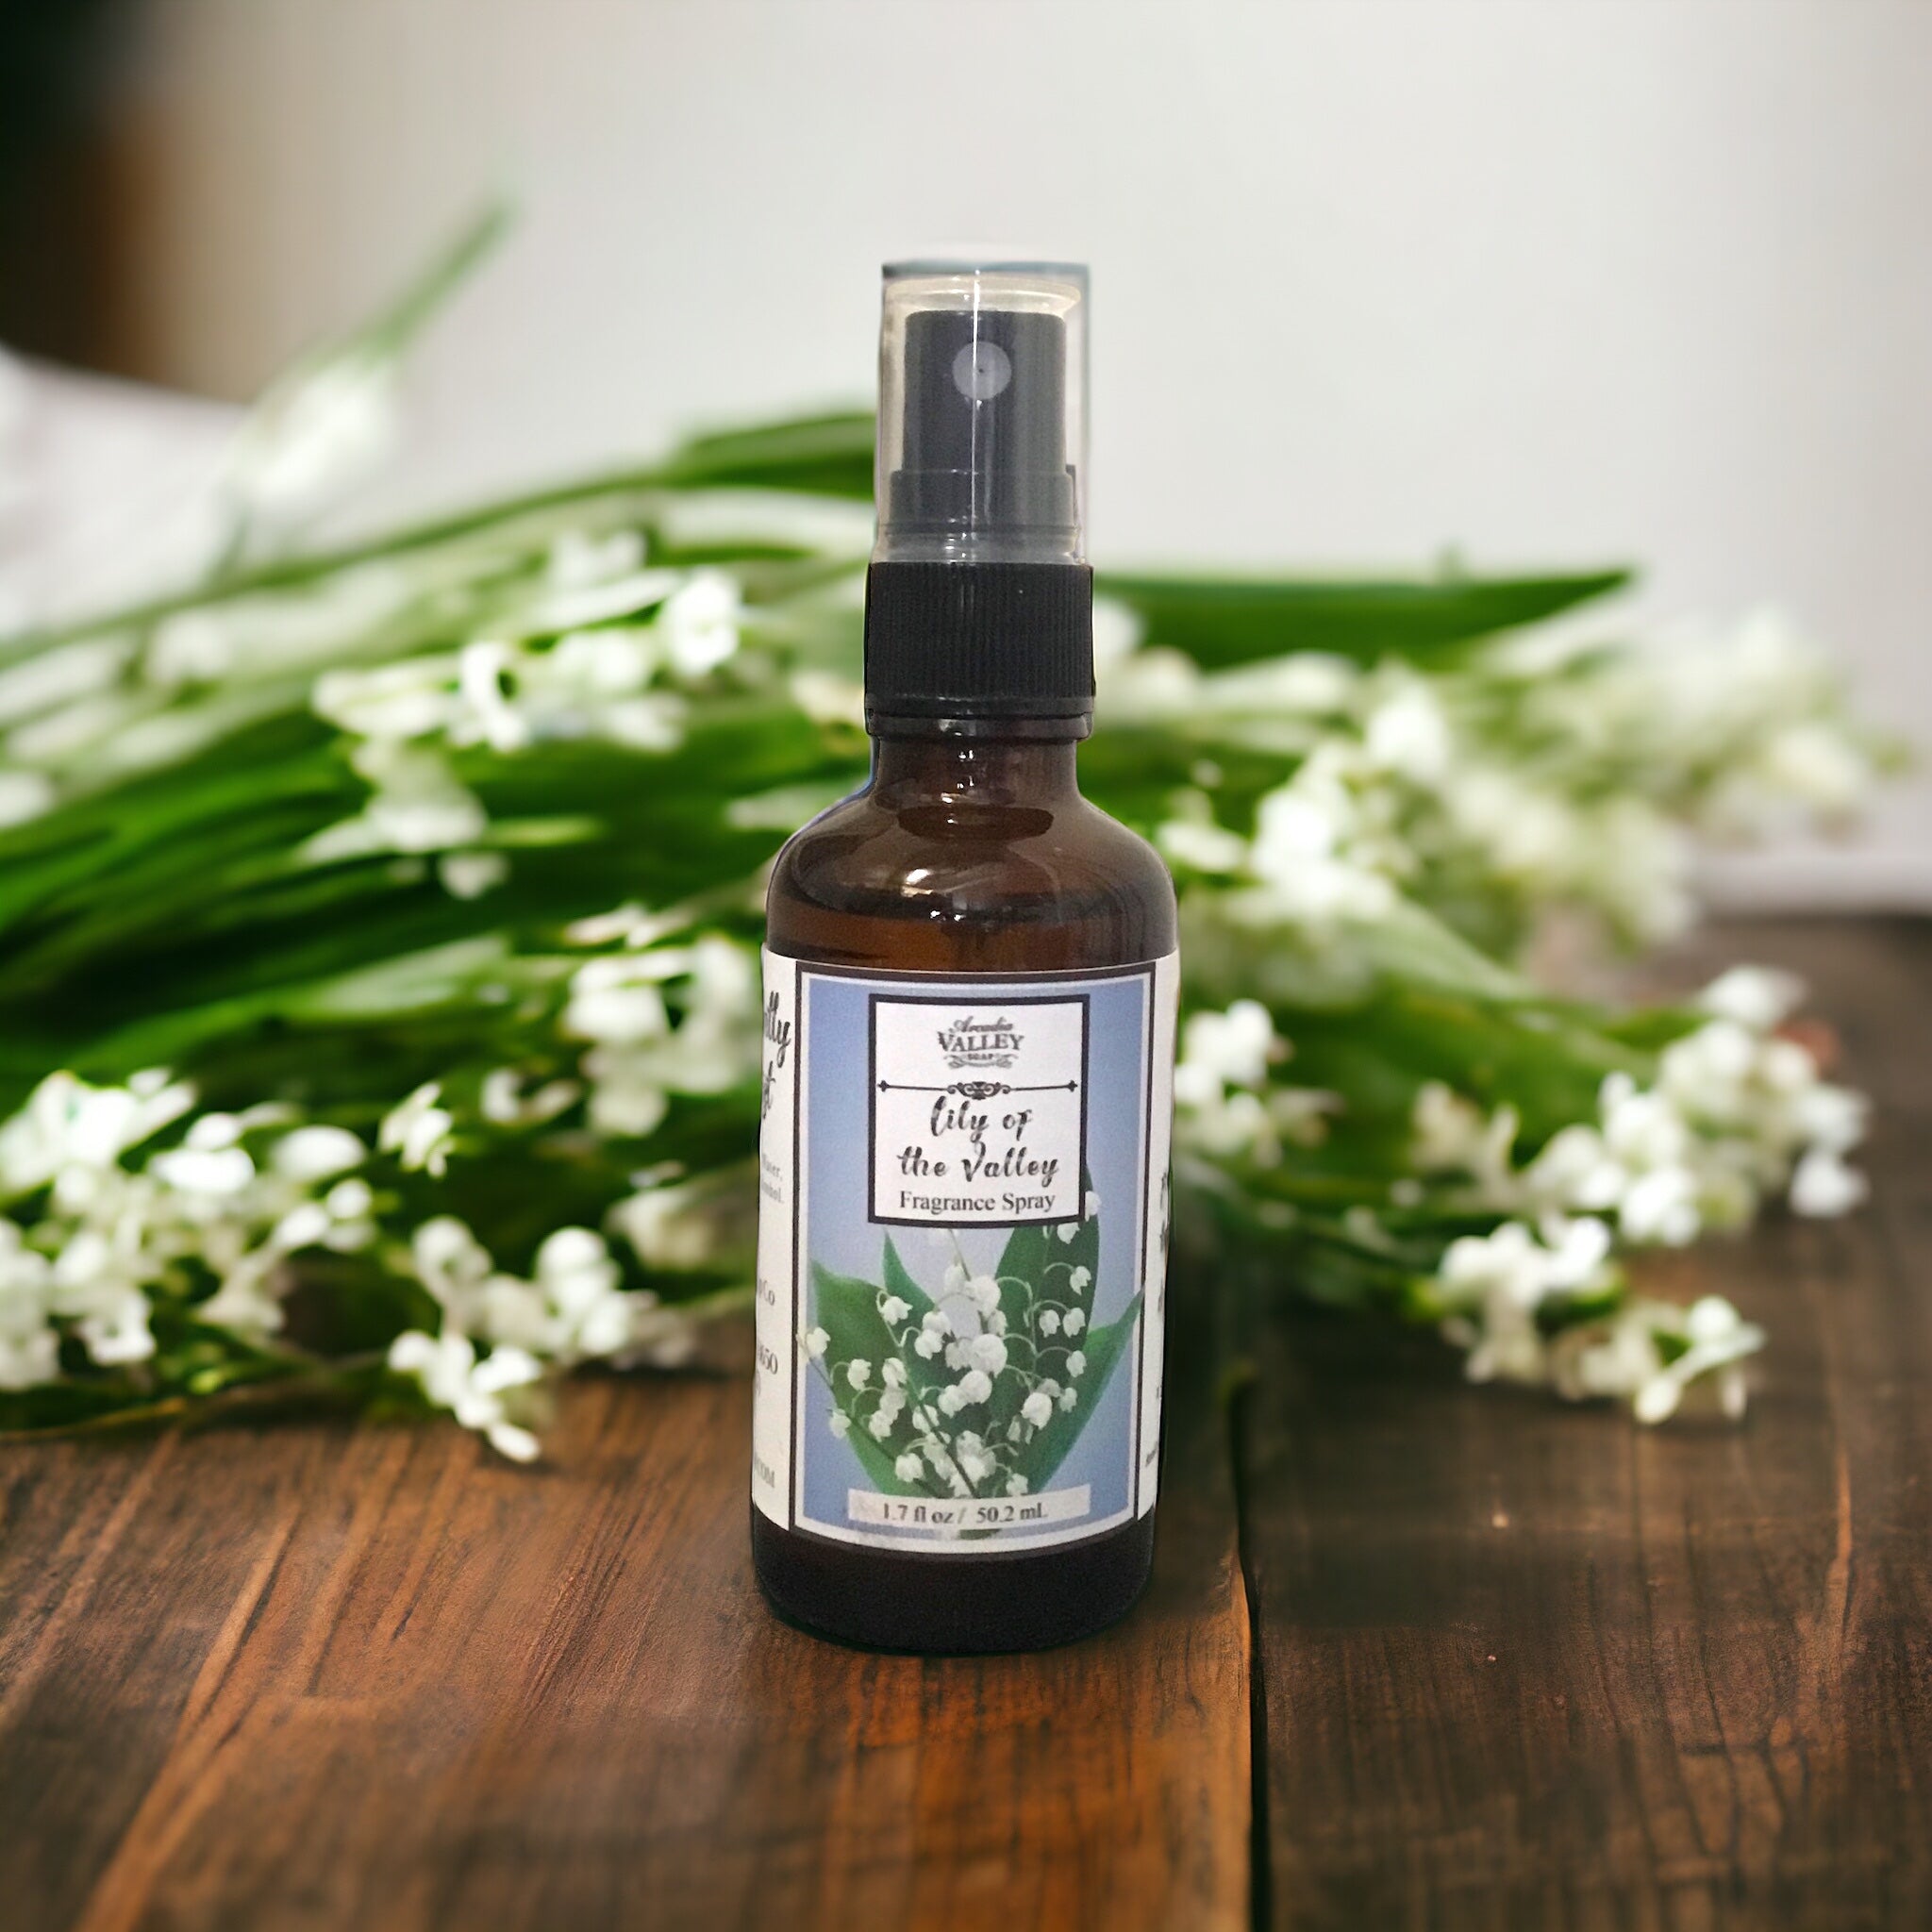 Lily of the Valley Fragrance Spray